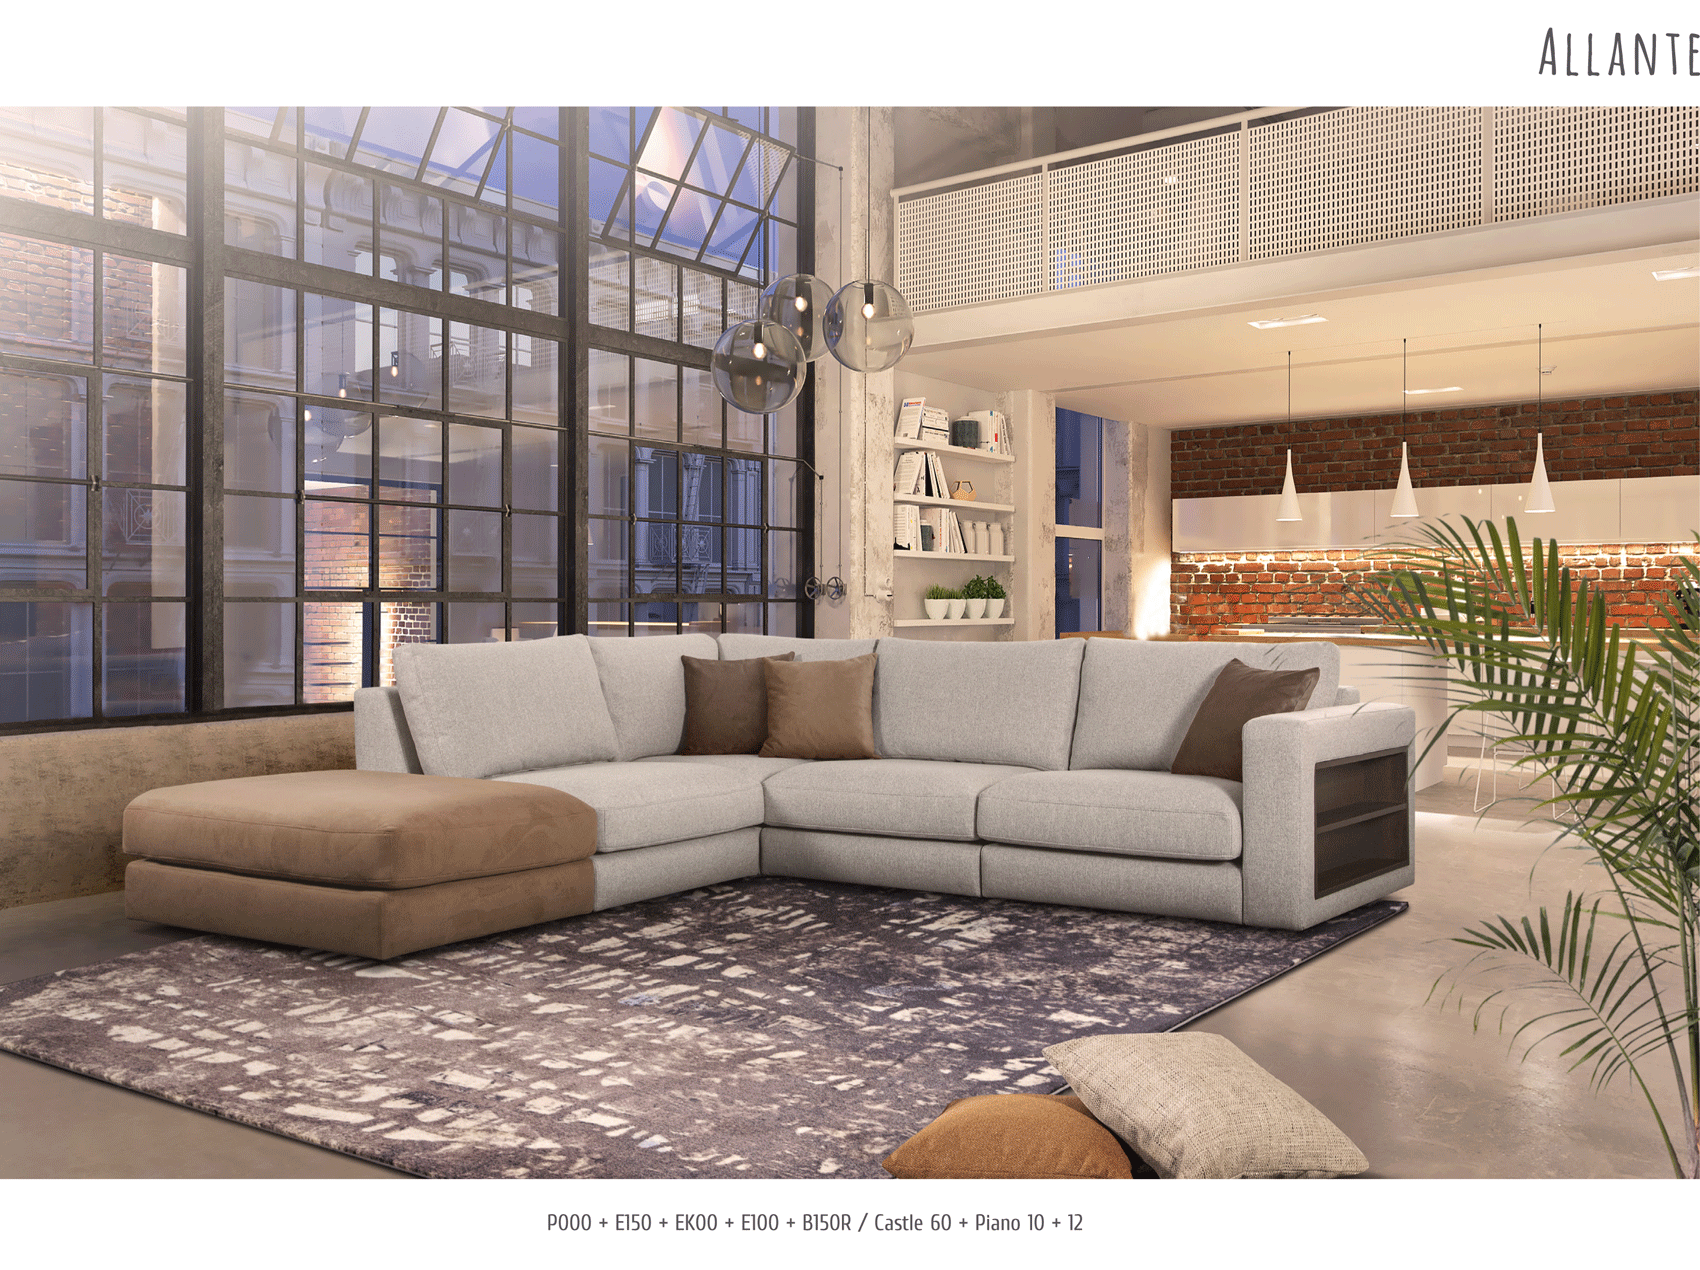 Living Room Furniture Sleepers Sofas Loveseats and Chairs Allante Sectional